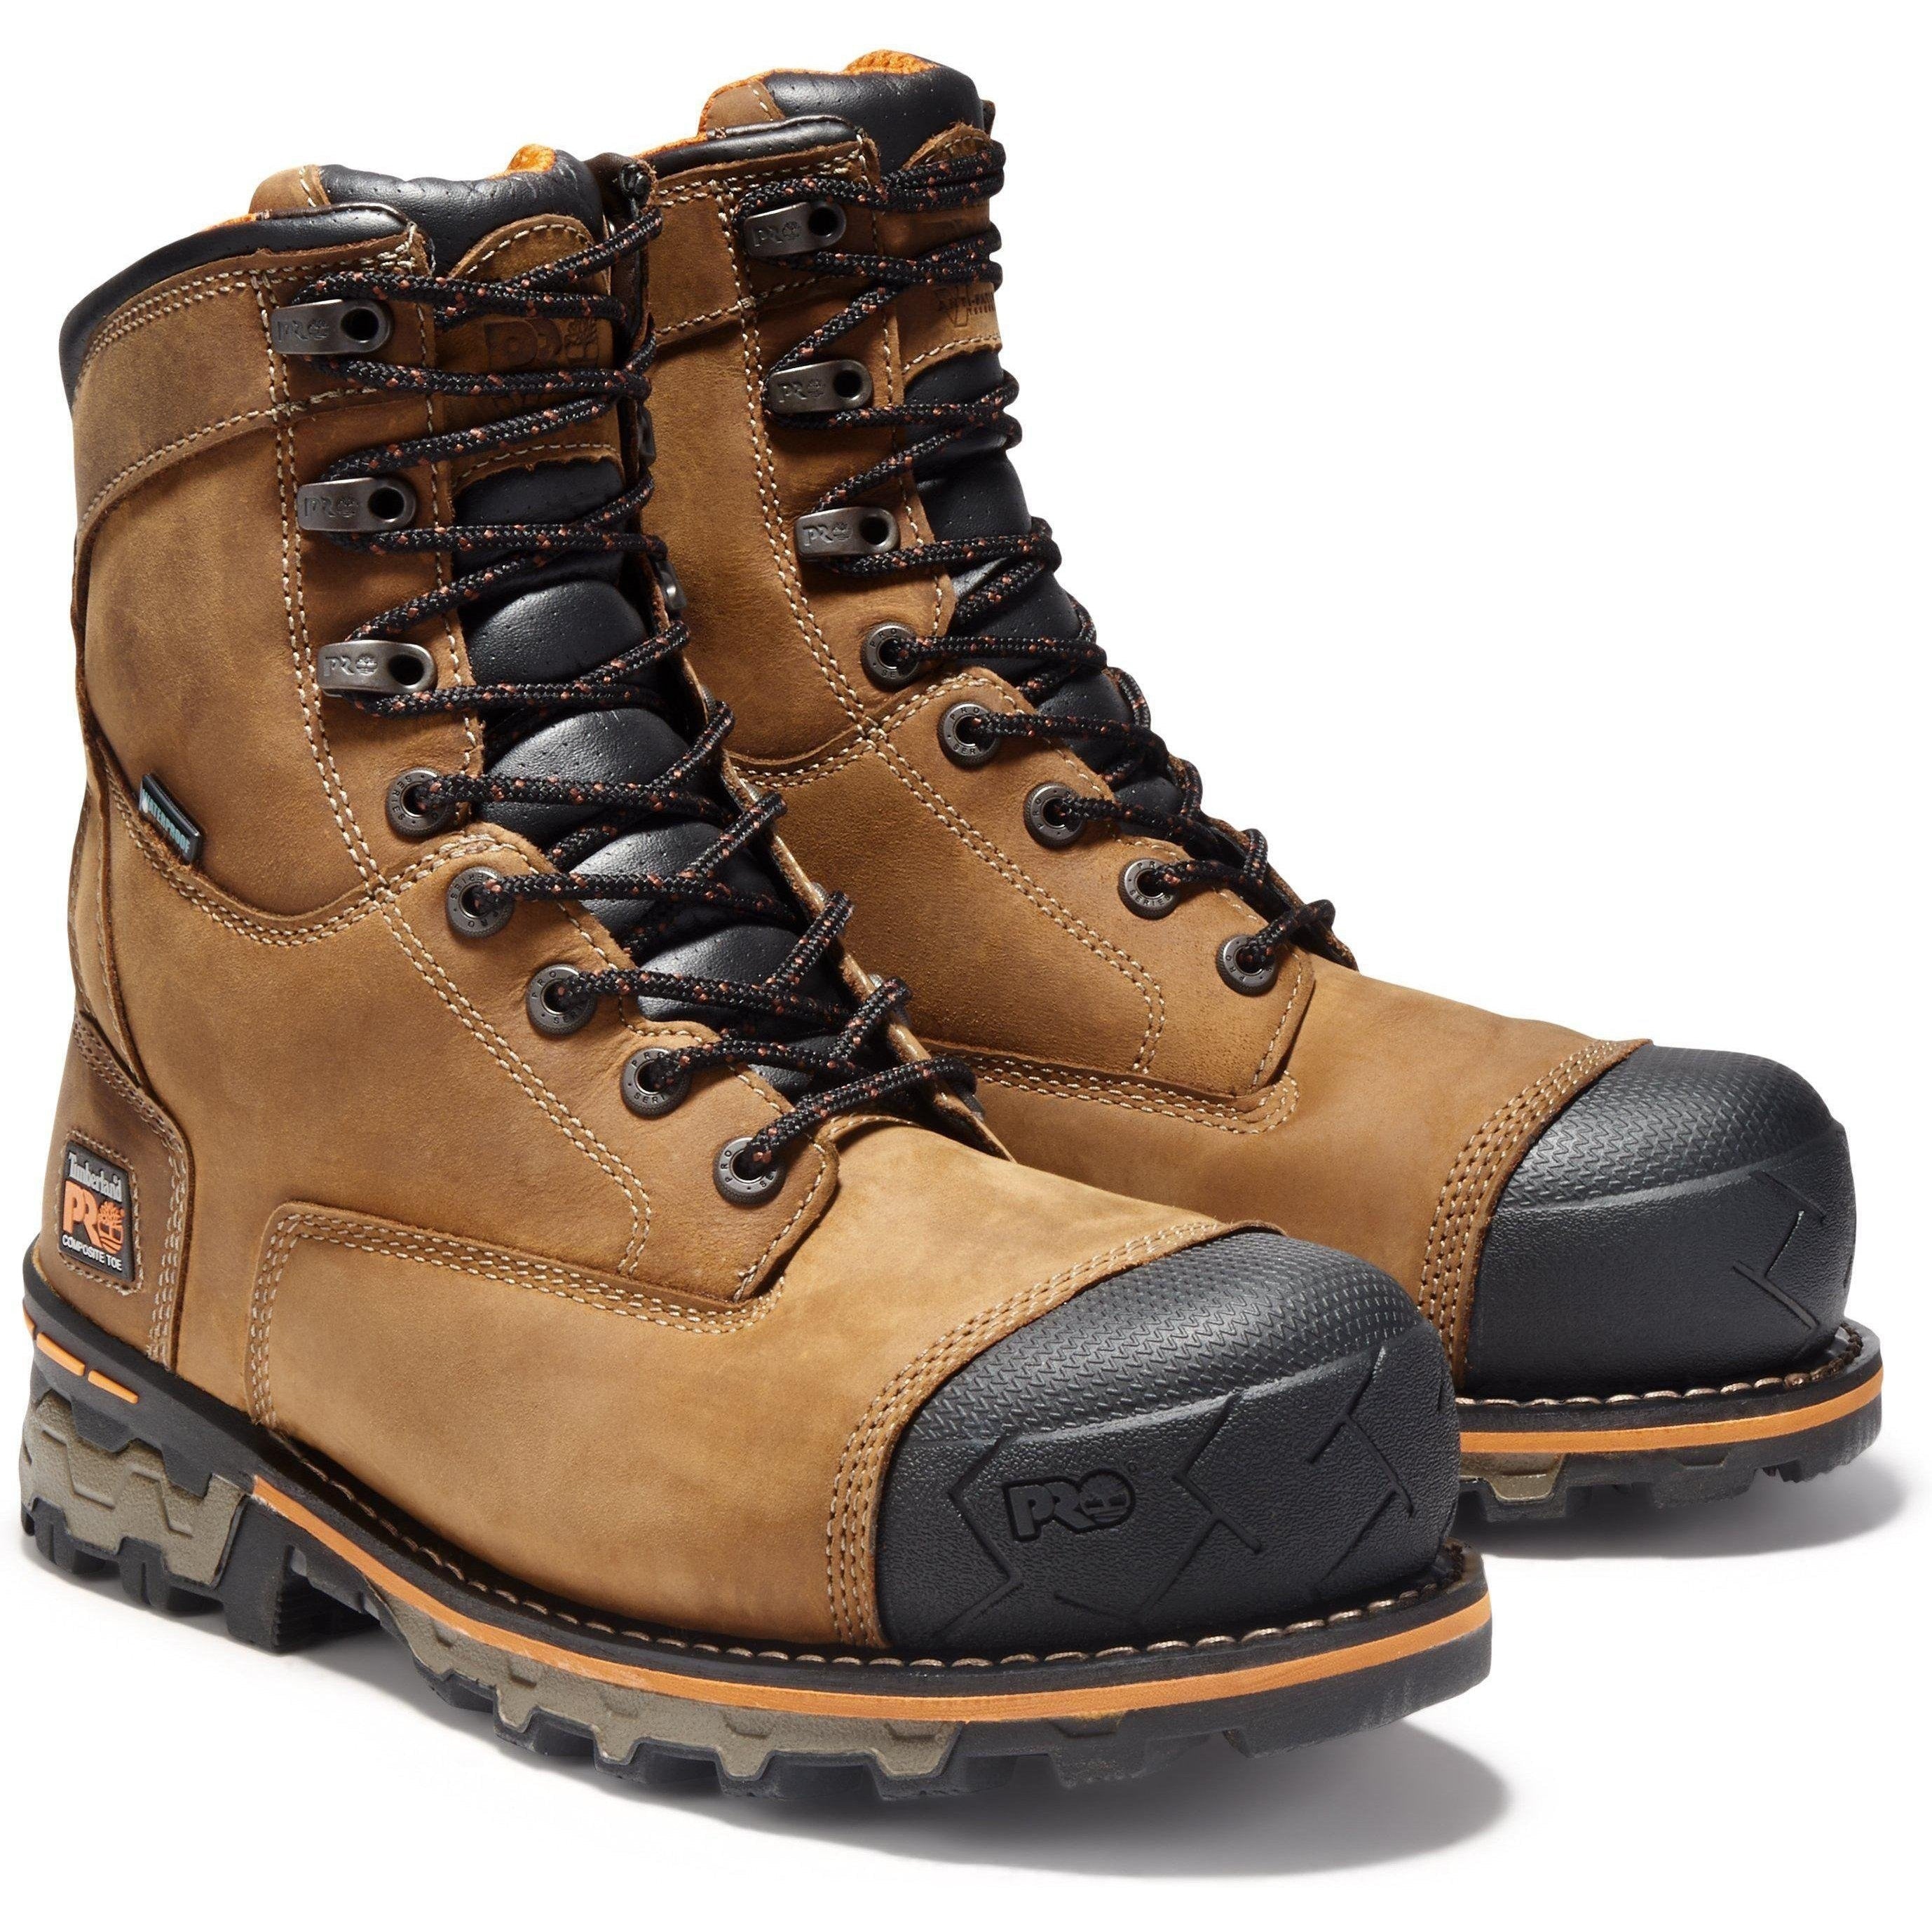 Timberland PRO Men's Boondock 8" Comp Toe WP Work Boot - TB192671214 7 / Medium / Brown Oiled Distressed - Overlook Boots